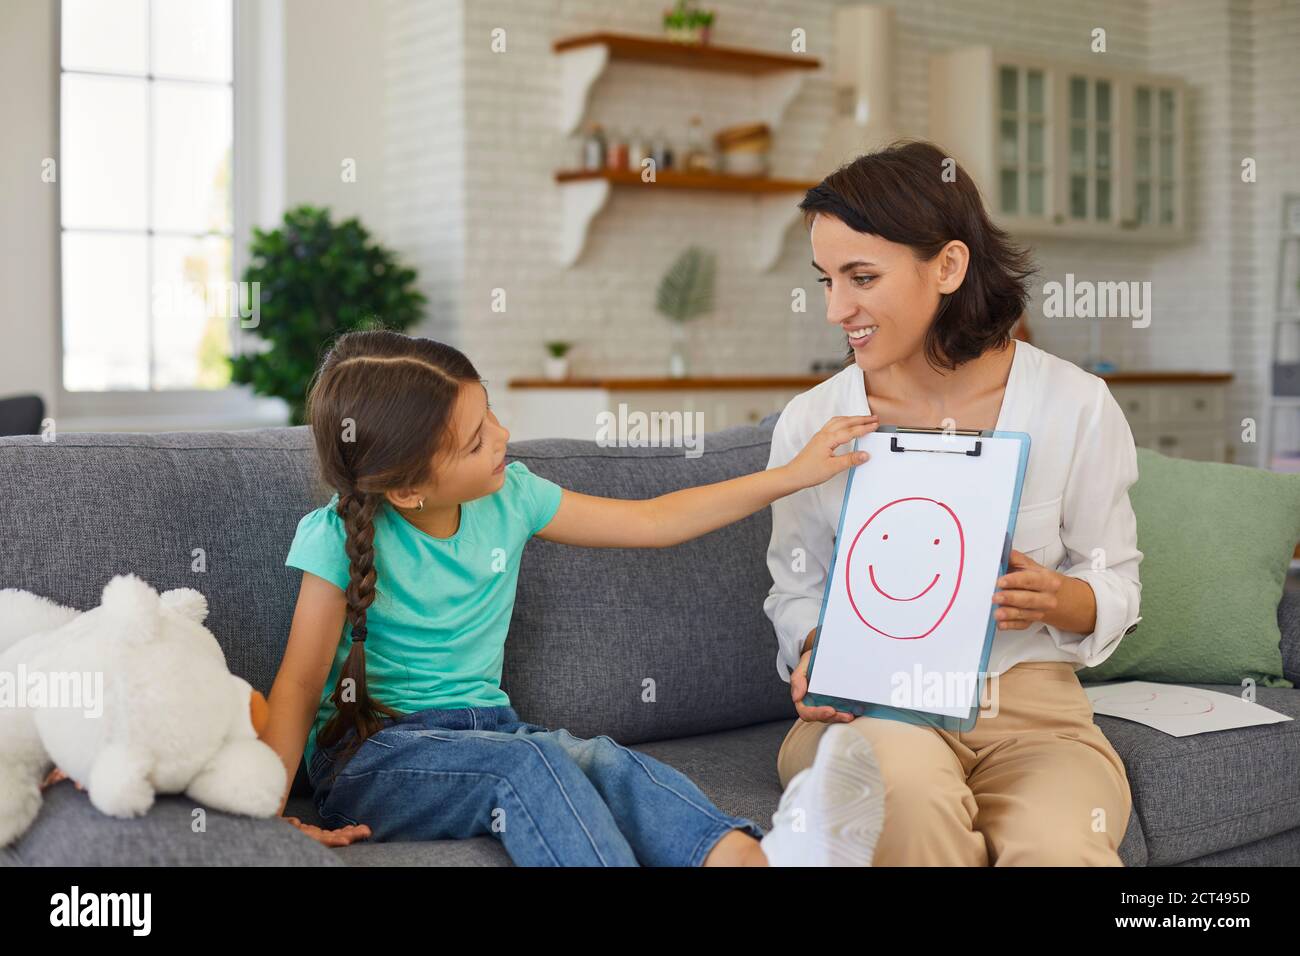 Private therapist talking to curious little girl during therapy session at home Stock Photo